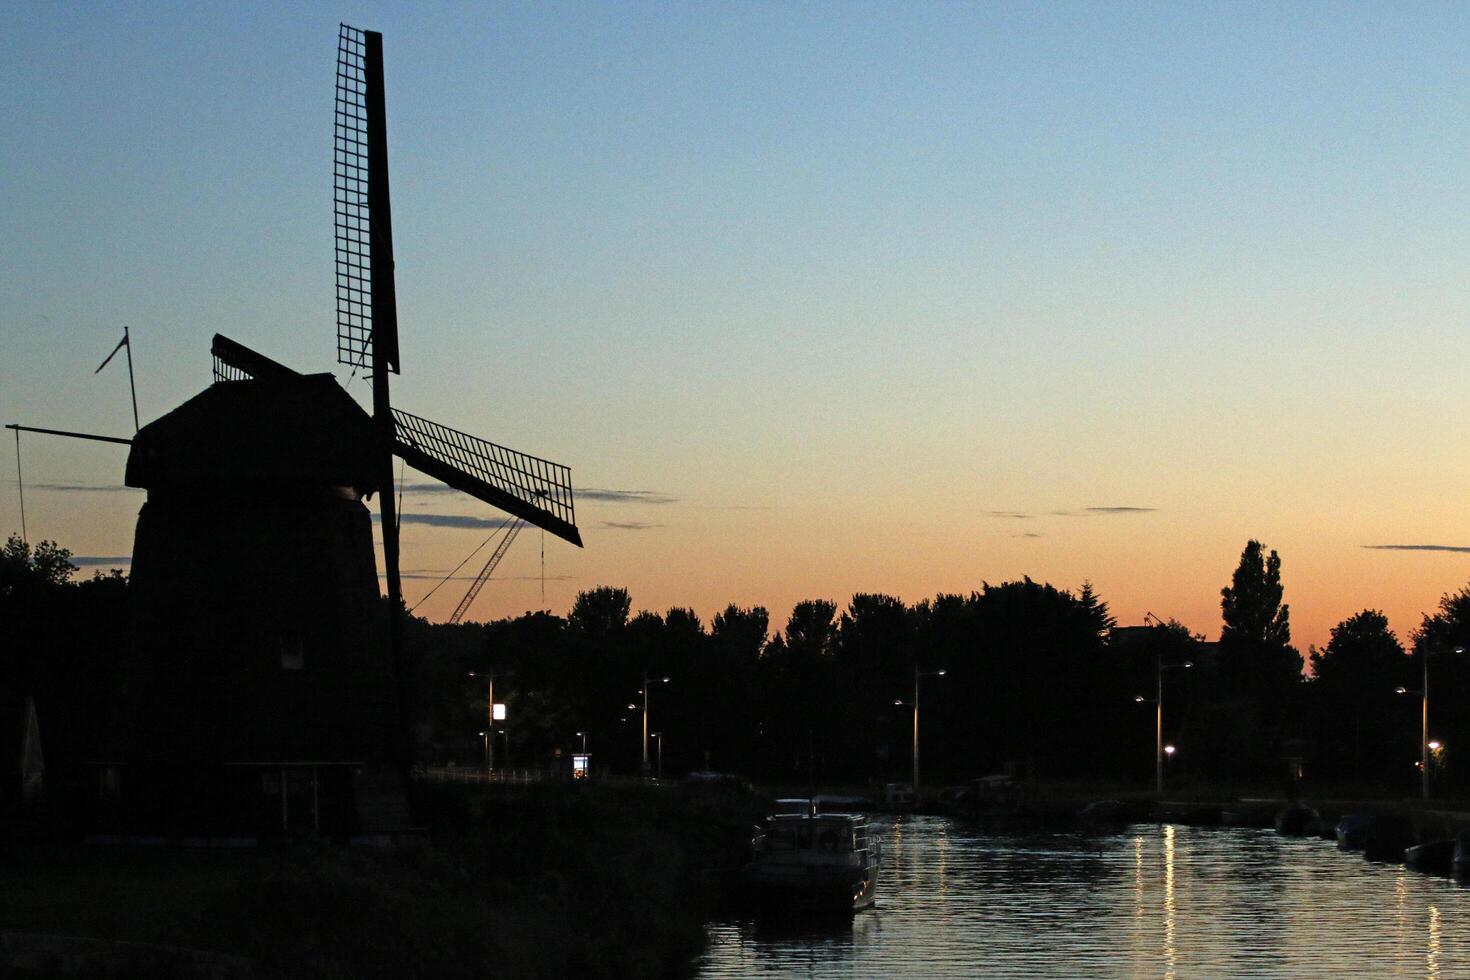 sunset in a dutch landscape, windmill and canal photo